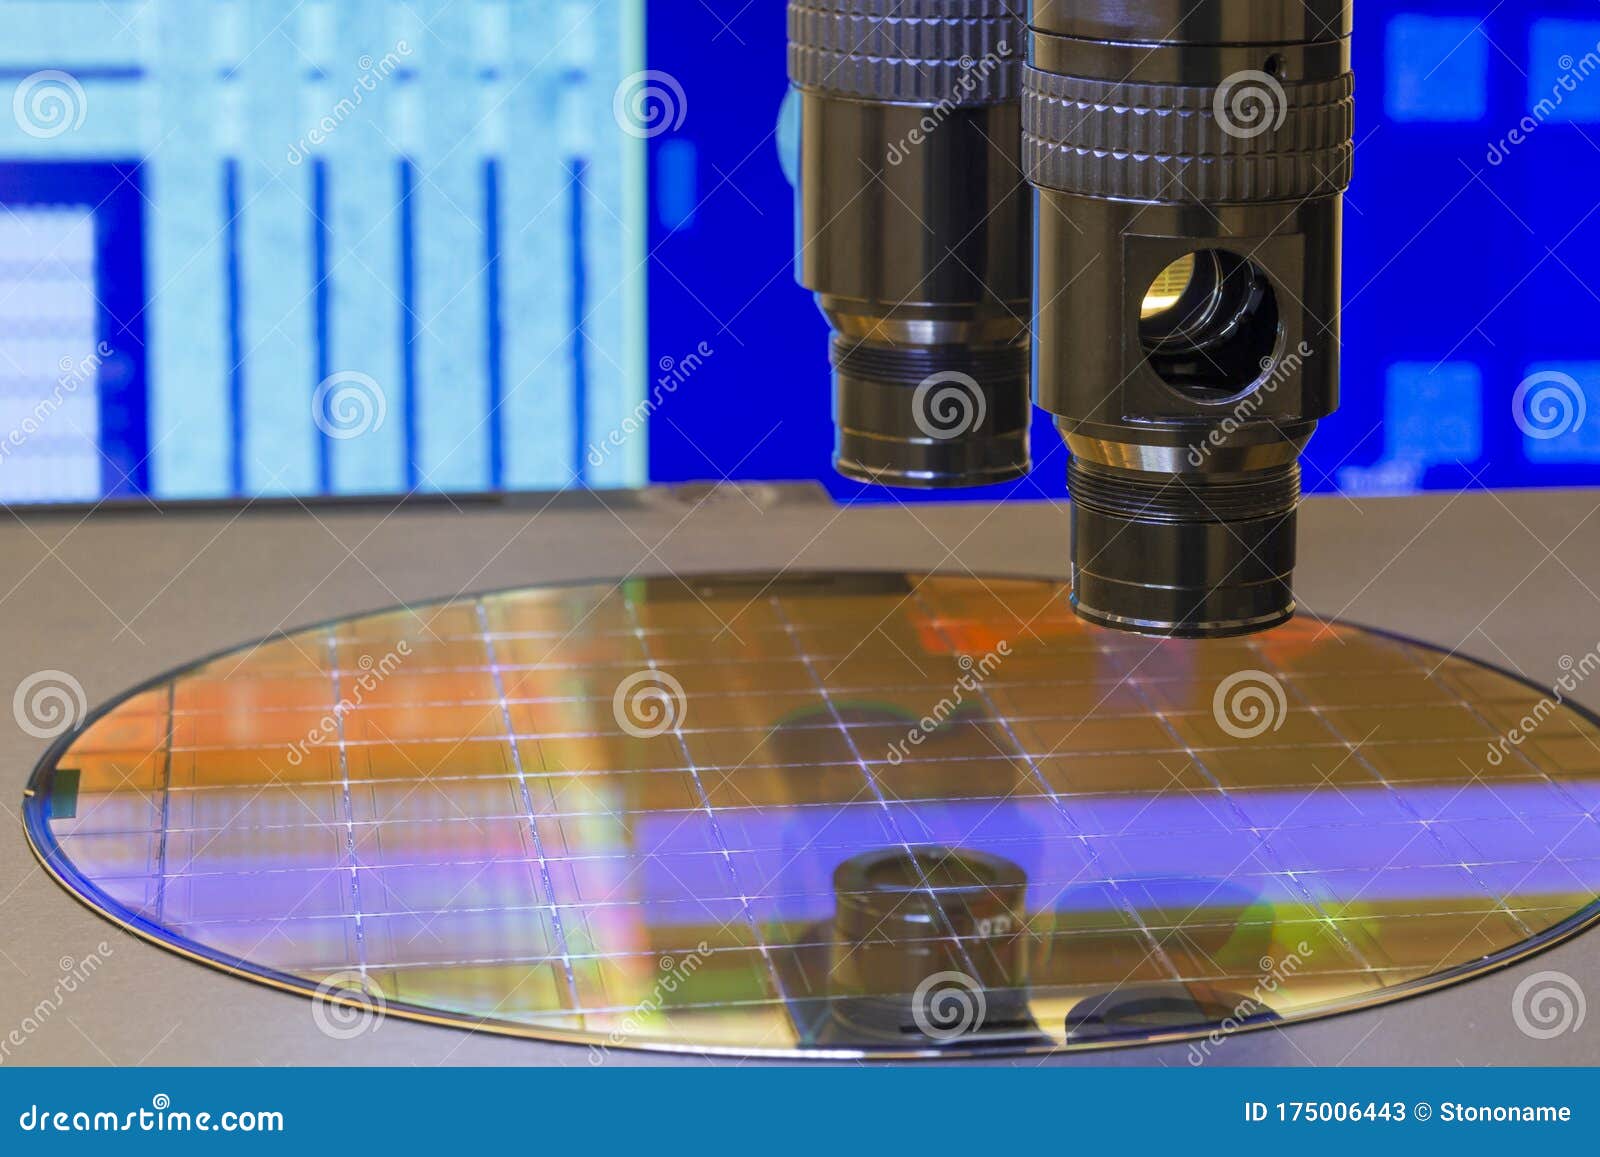 silicon wafer with semiconductor microchip on machine process examining testing in microscope